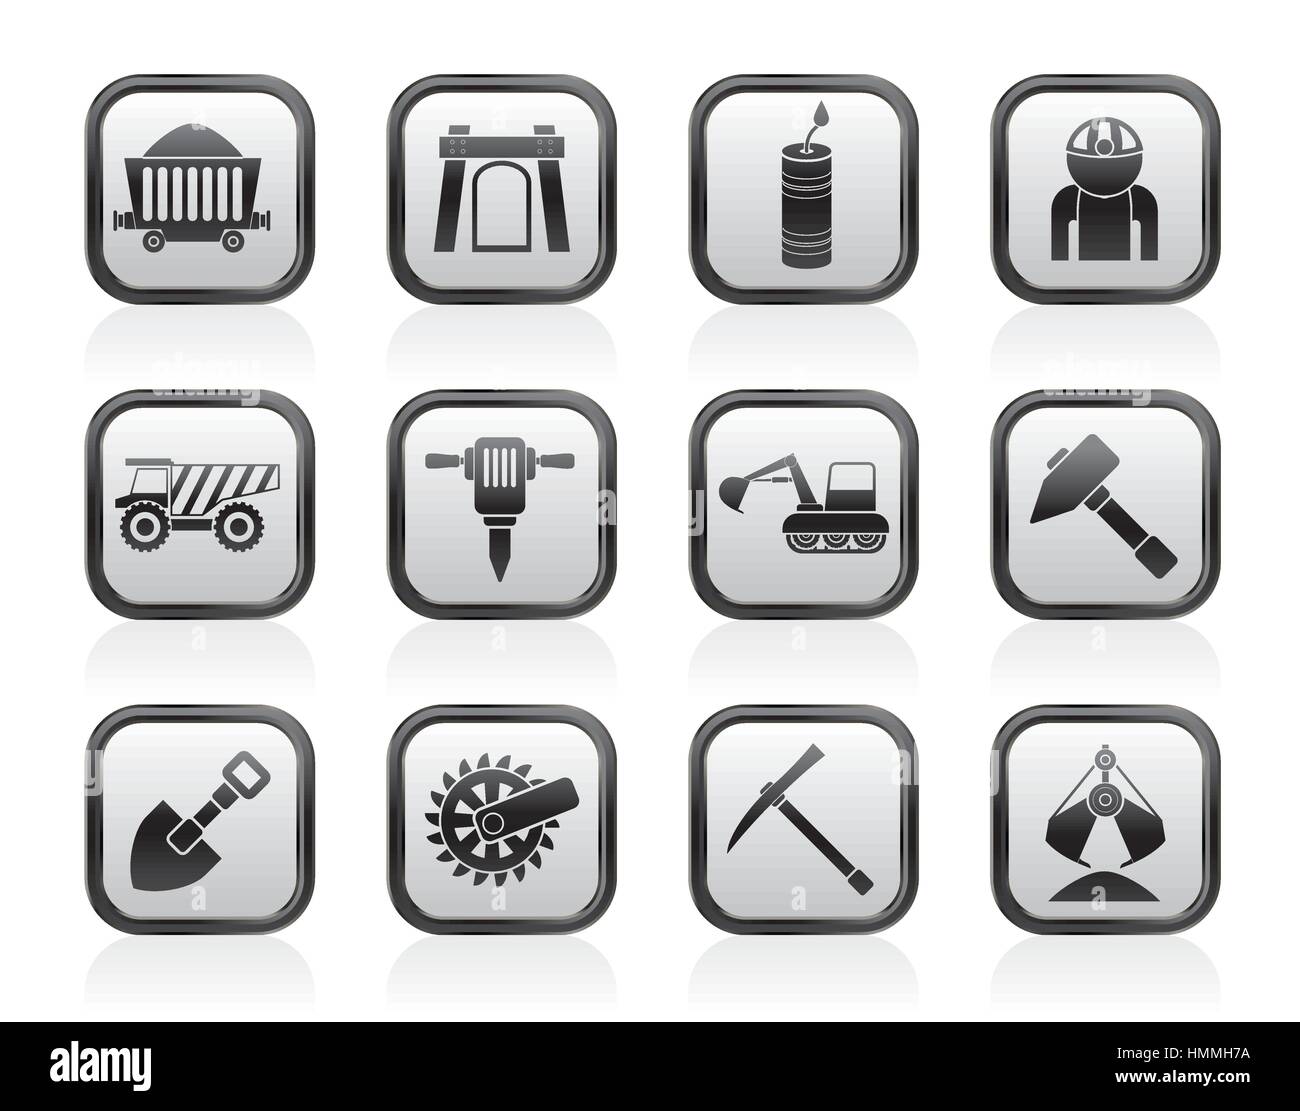 Mining and quarrying industry objects and icons Stock Vector